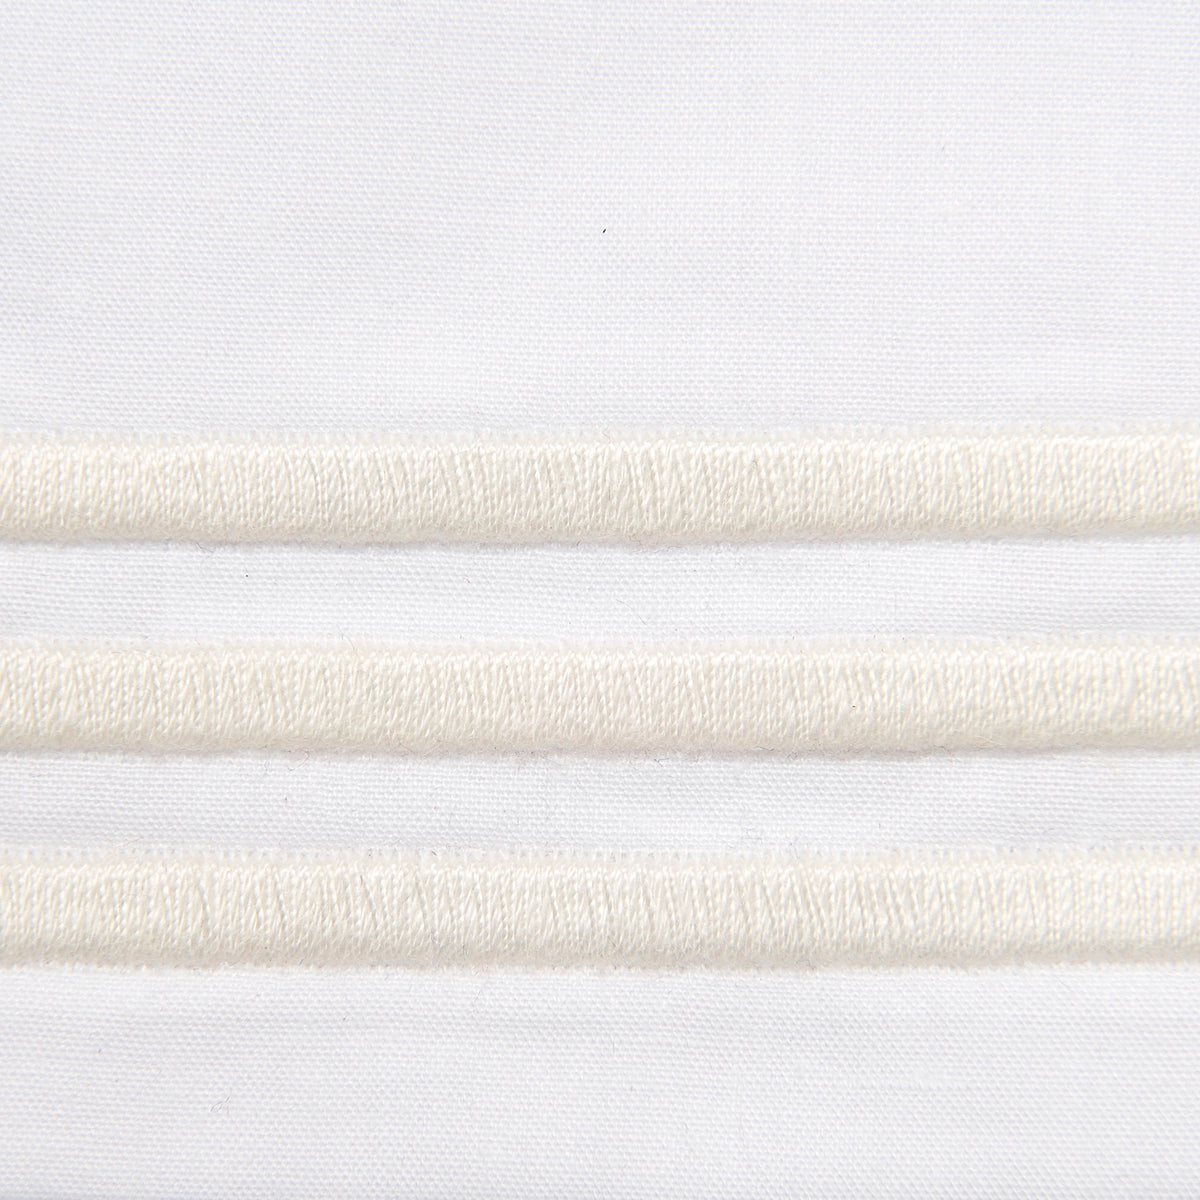 Swatch Sample of Signoria Platinum Percale Bedding in White/Ivory Color